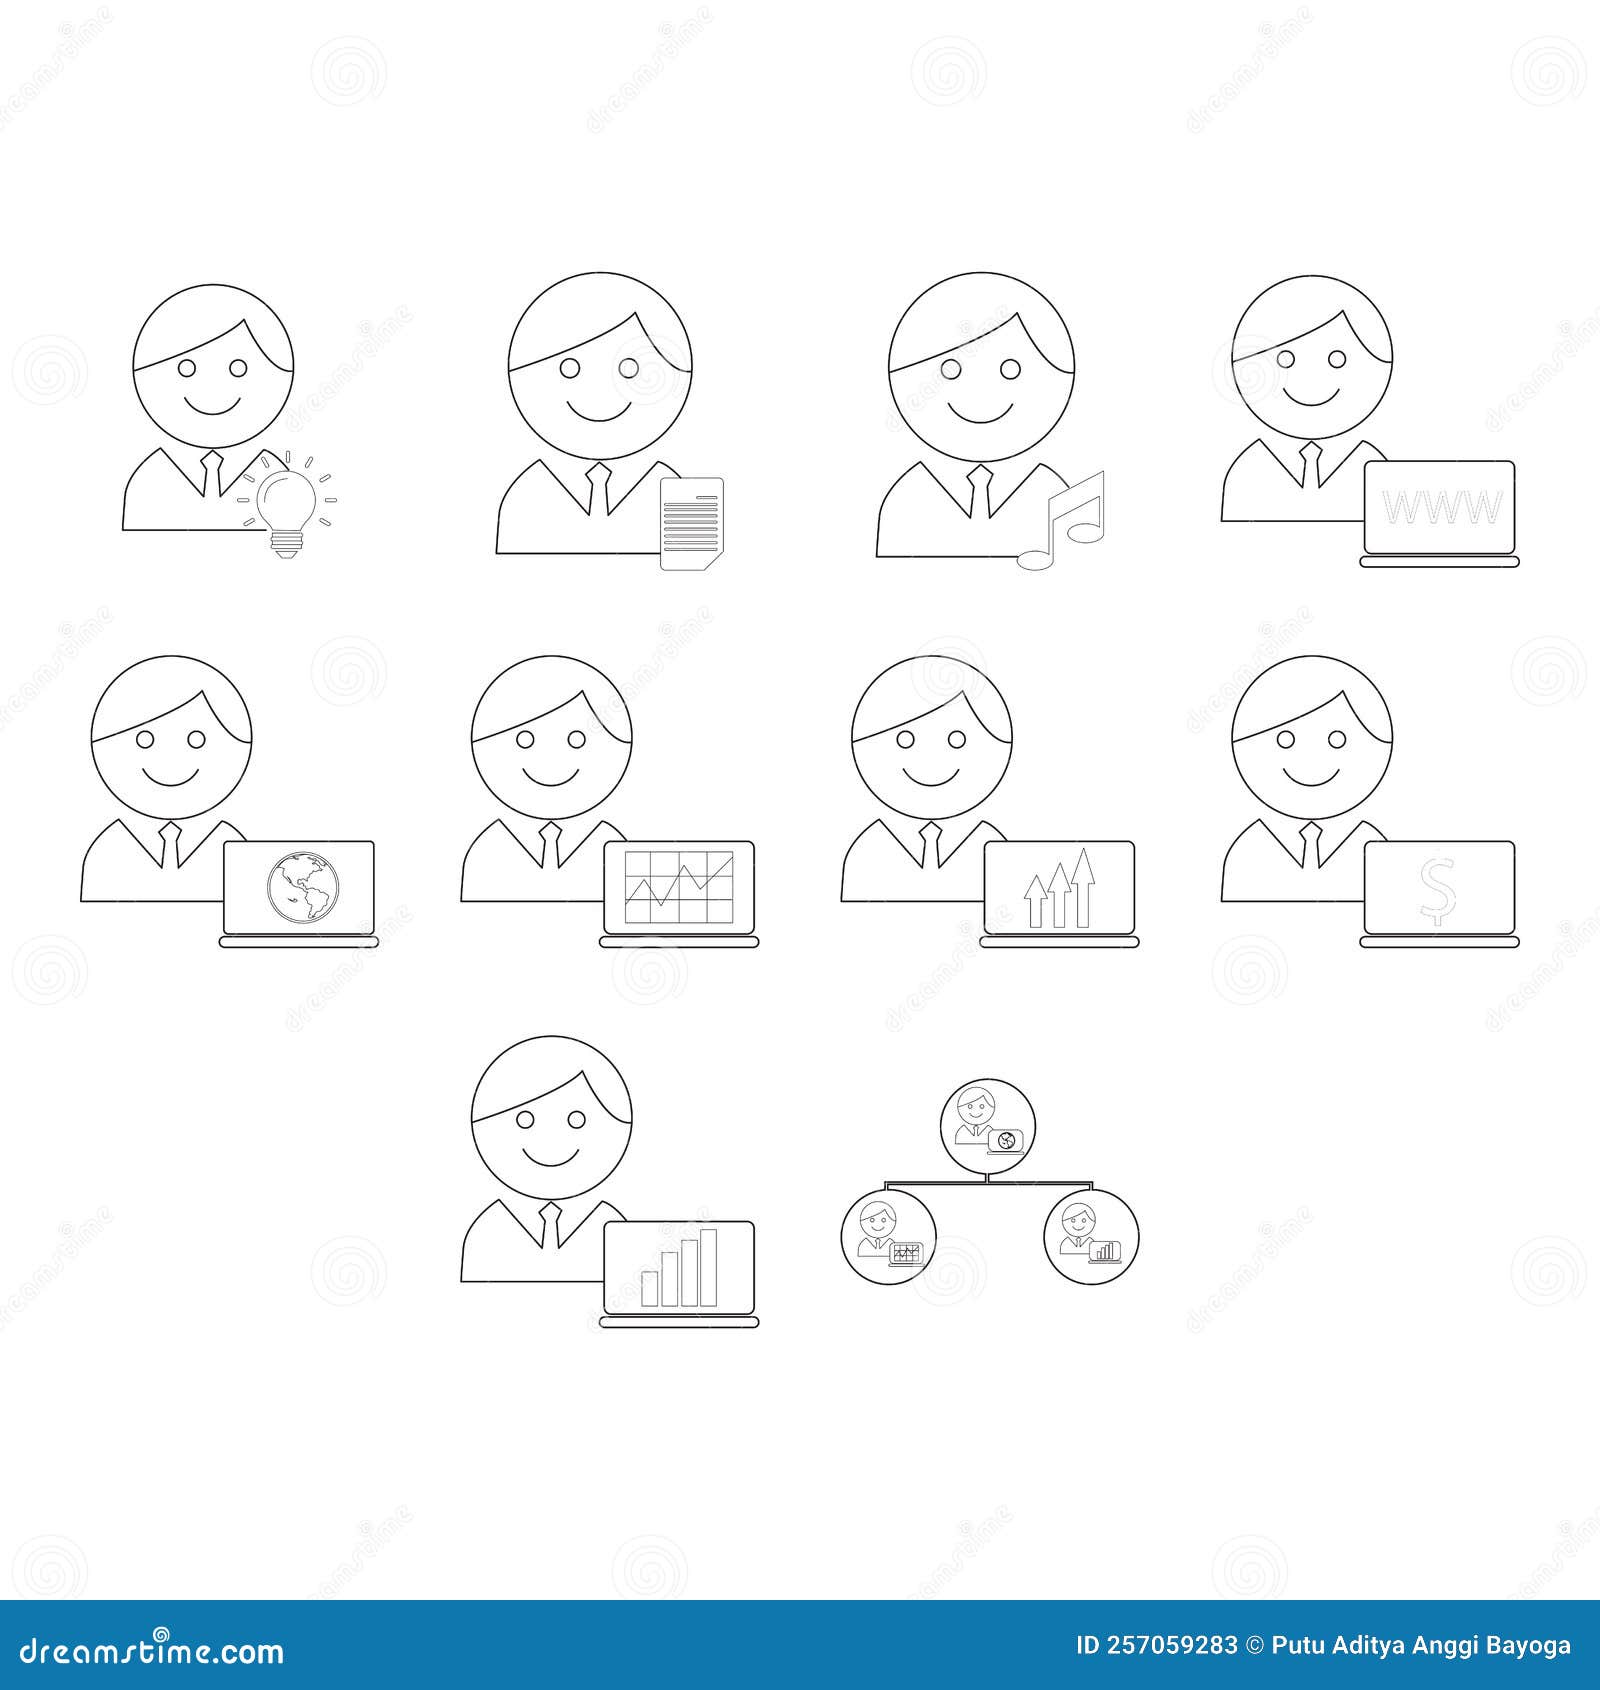 business people icon set